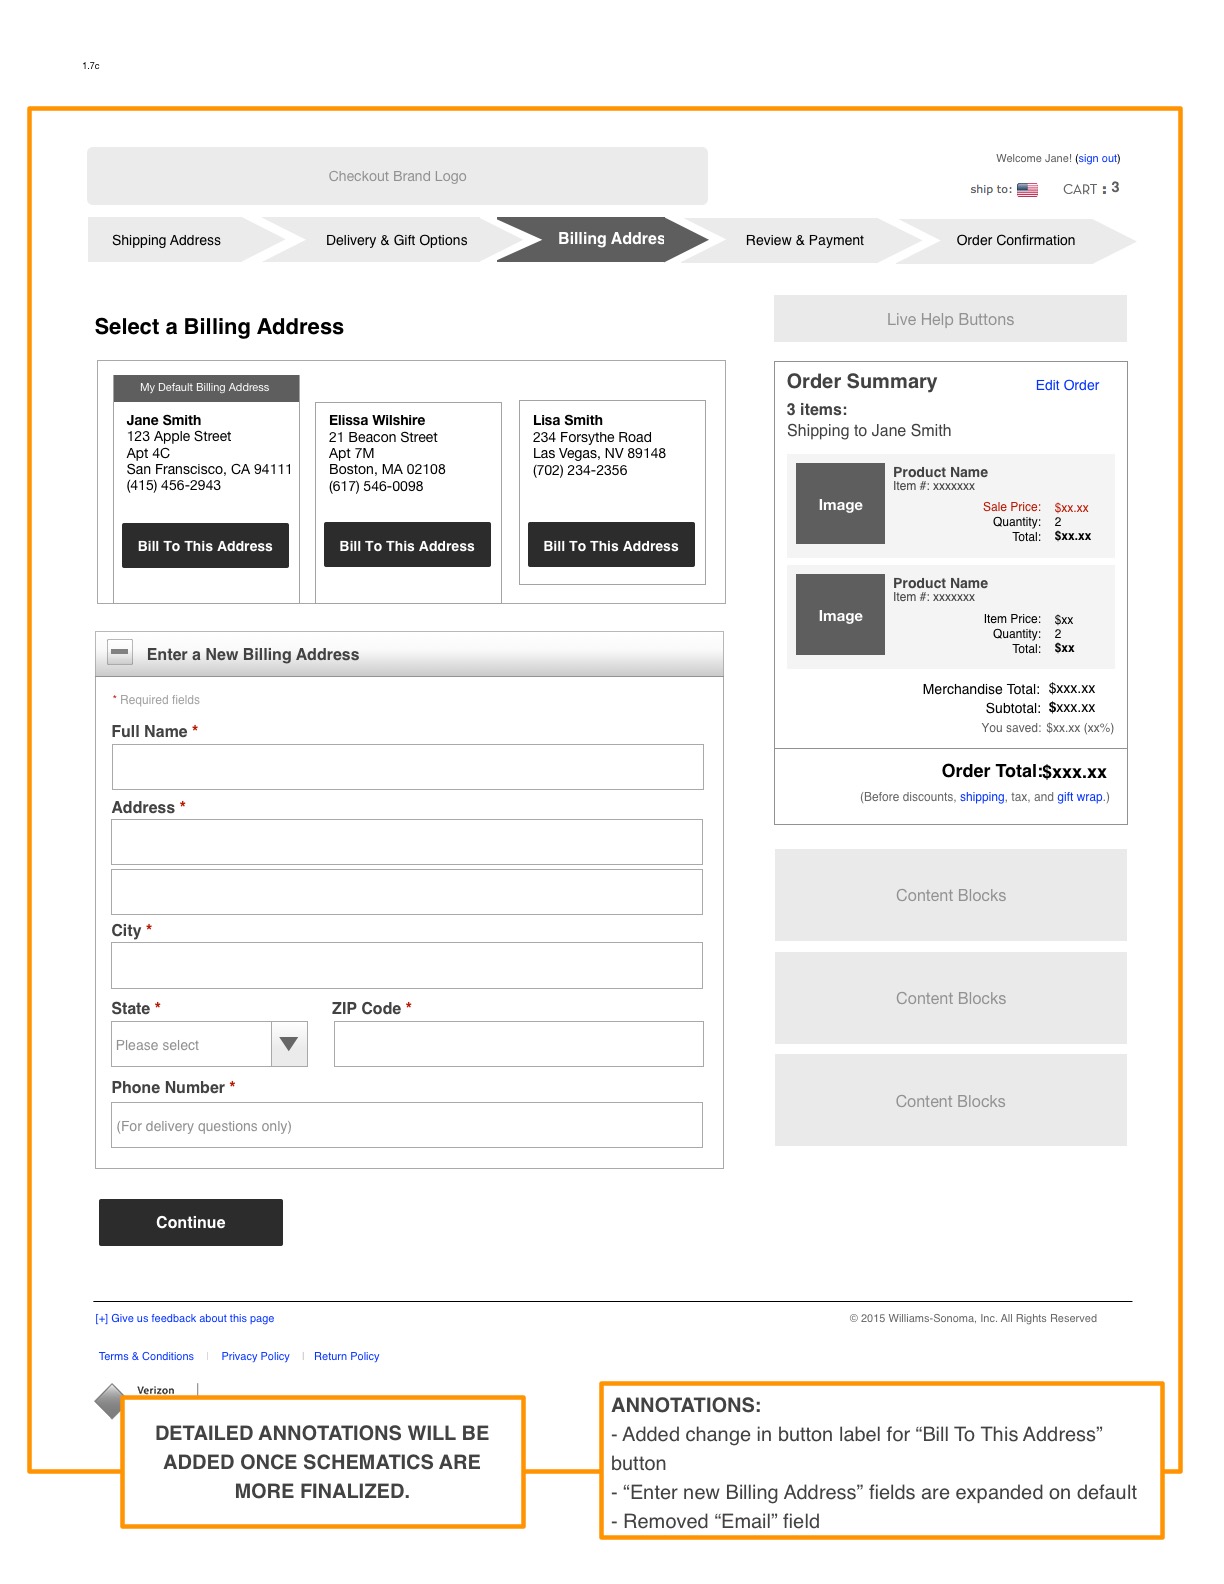 Billing Address Page - %22Use this as my billing%22 Checkbox Unchecked (No 1:1 Relationship).jpg